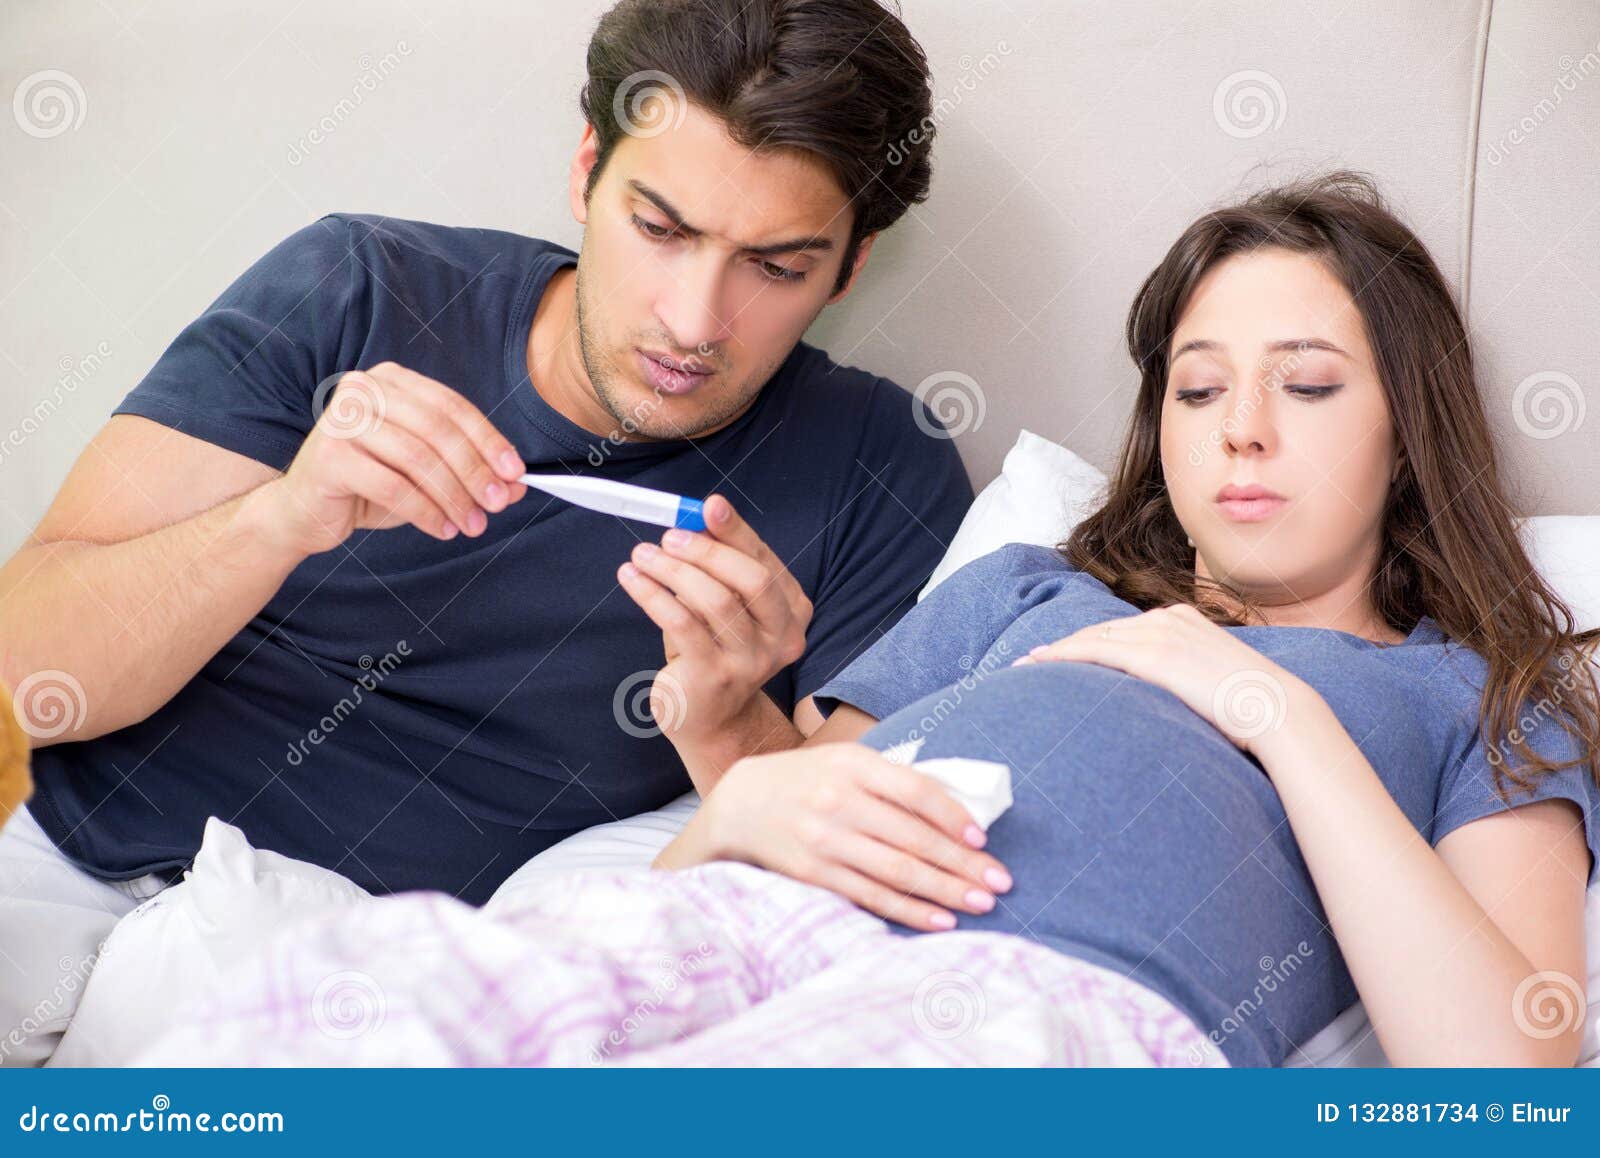 The Young Husband Looking After His Pregnant Wife Stock Photo I